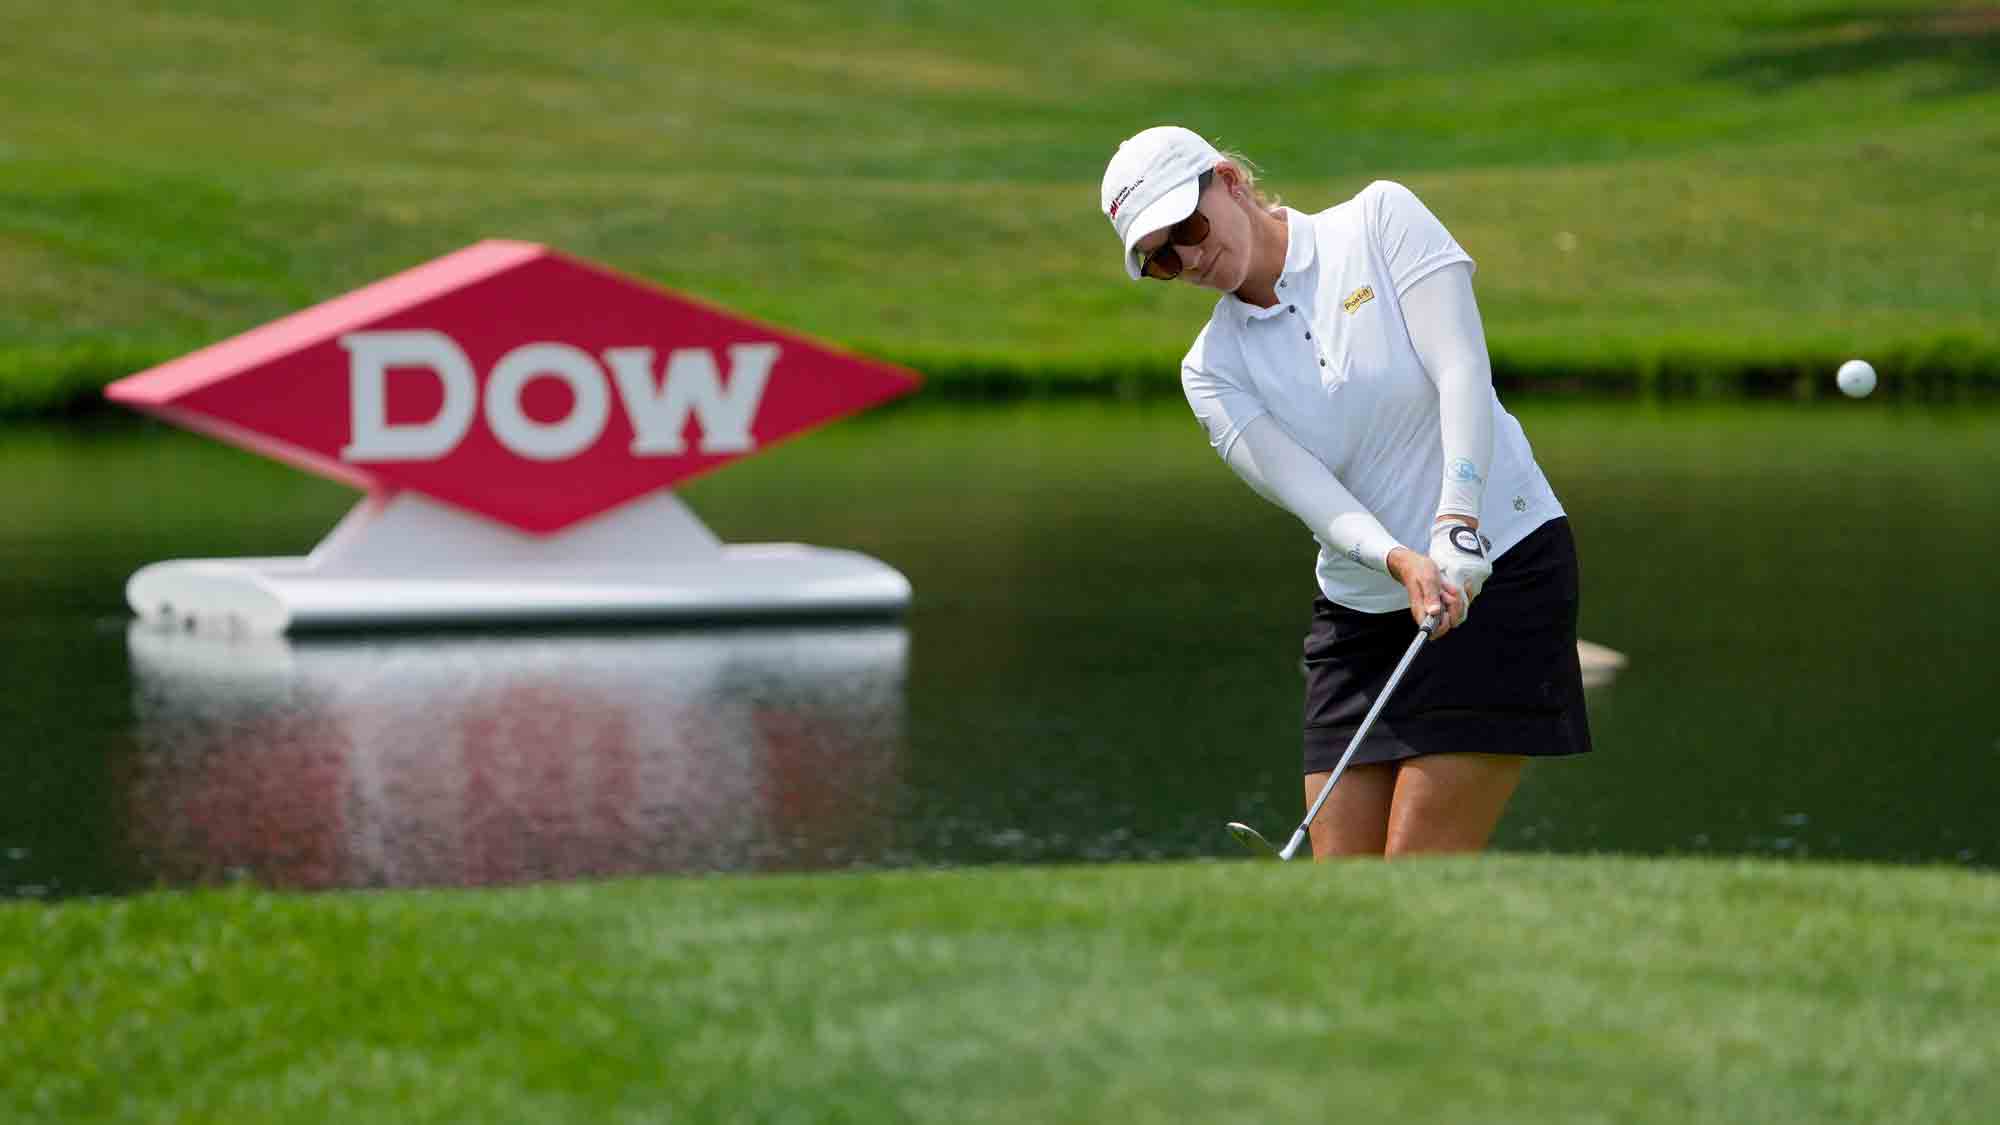 How to Watch the Dow Great Lakes Bay Invitational LPGA Ladies Professional Golf Association